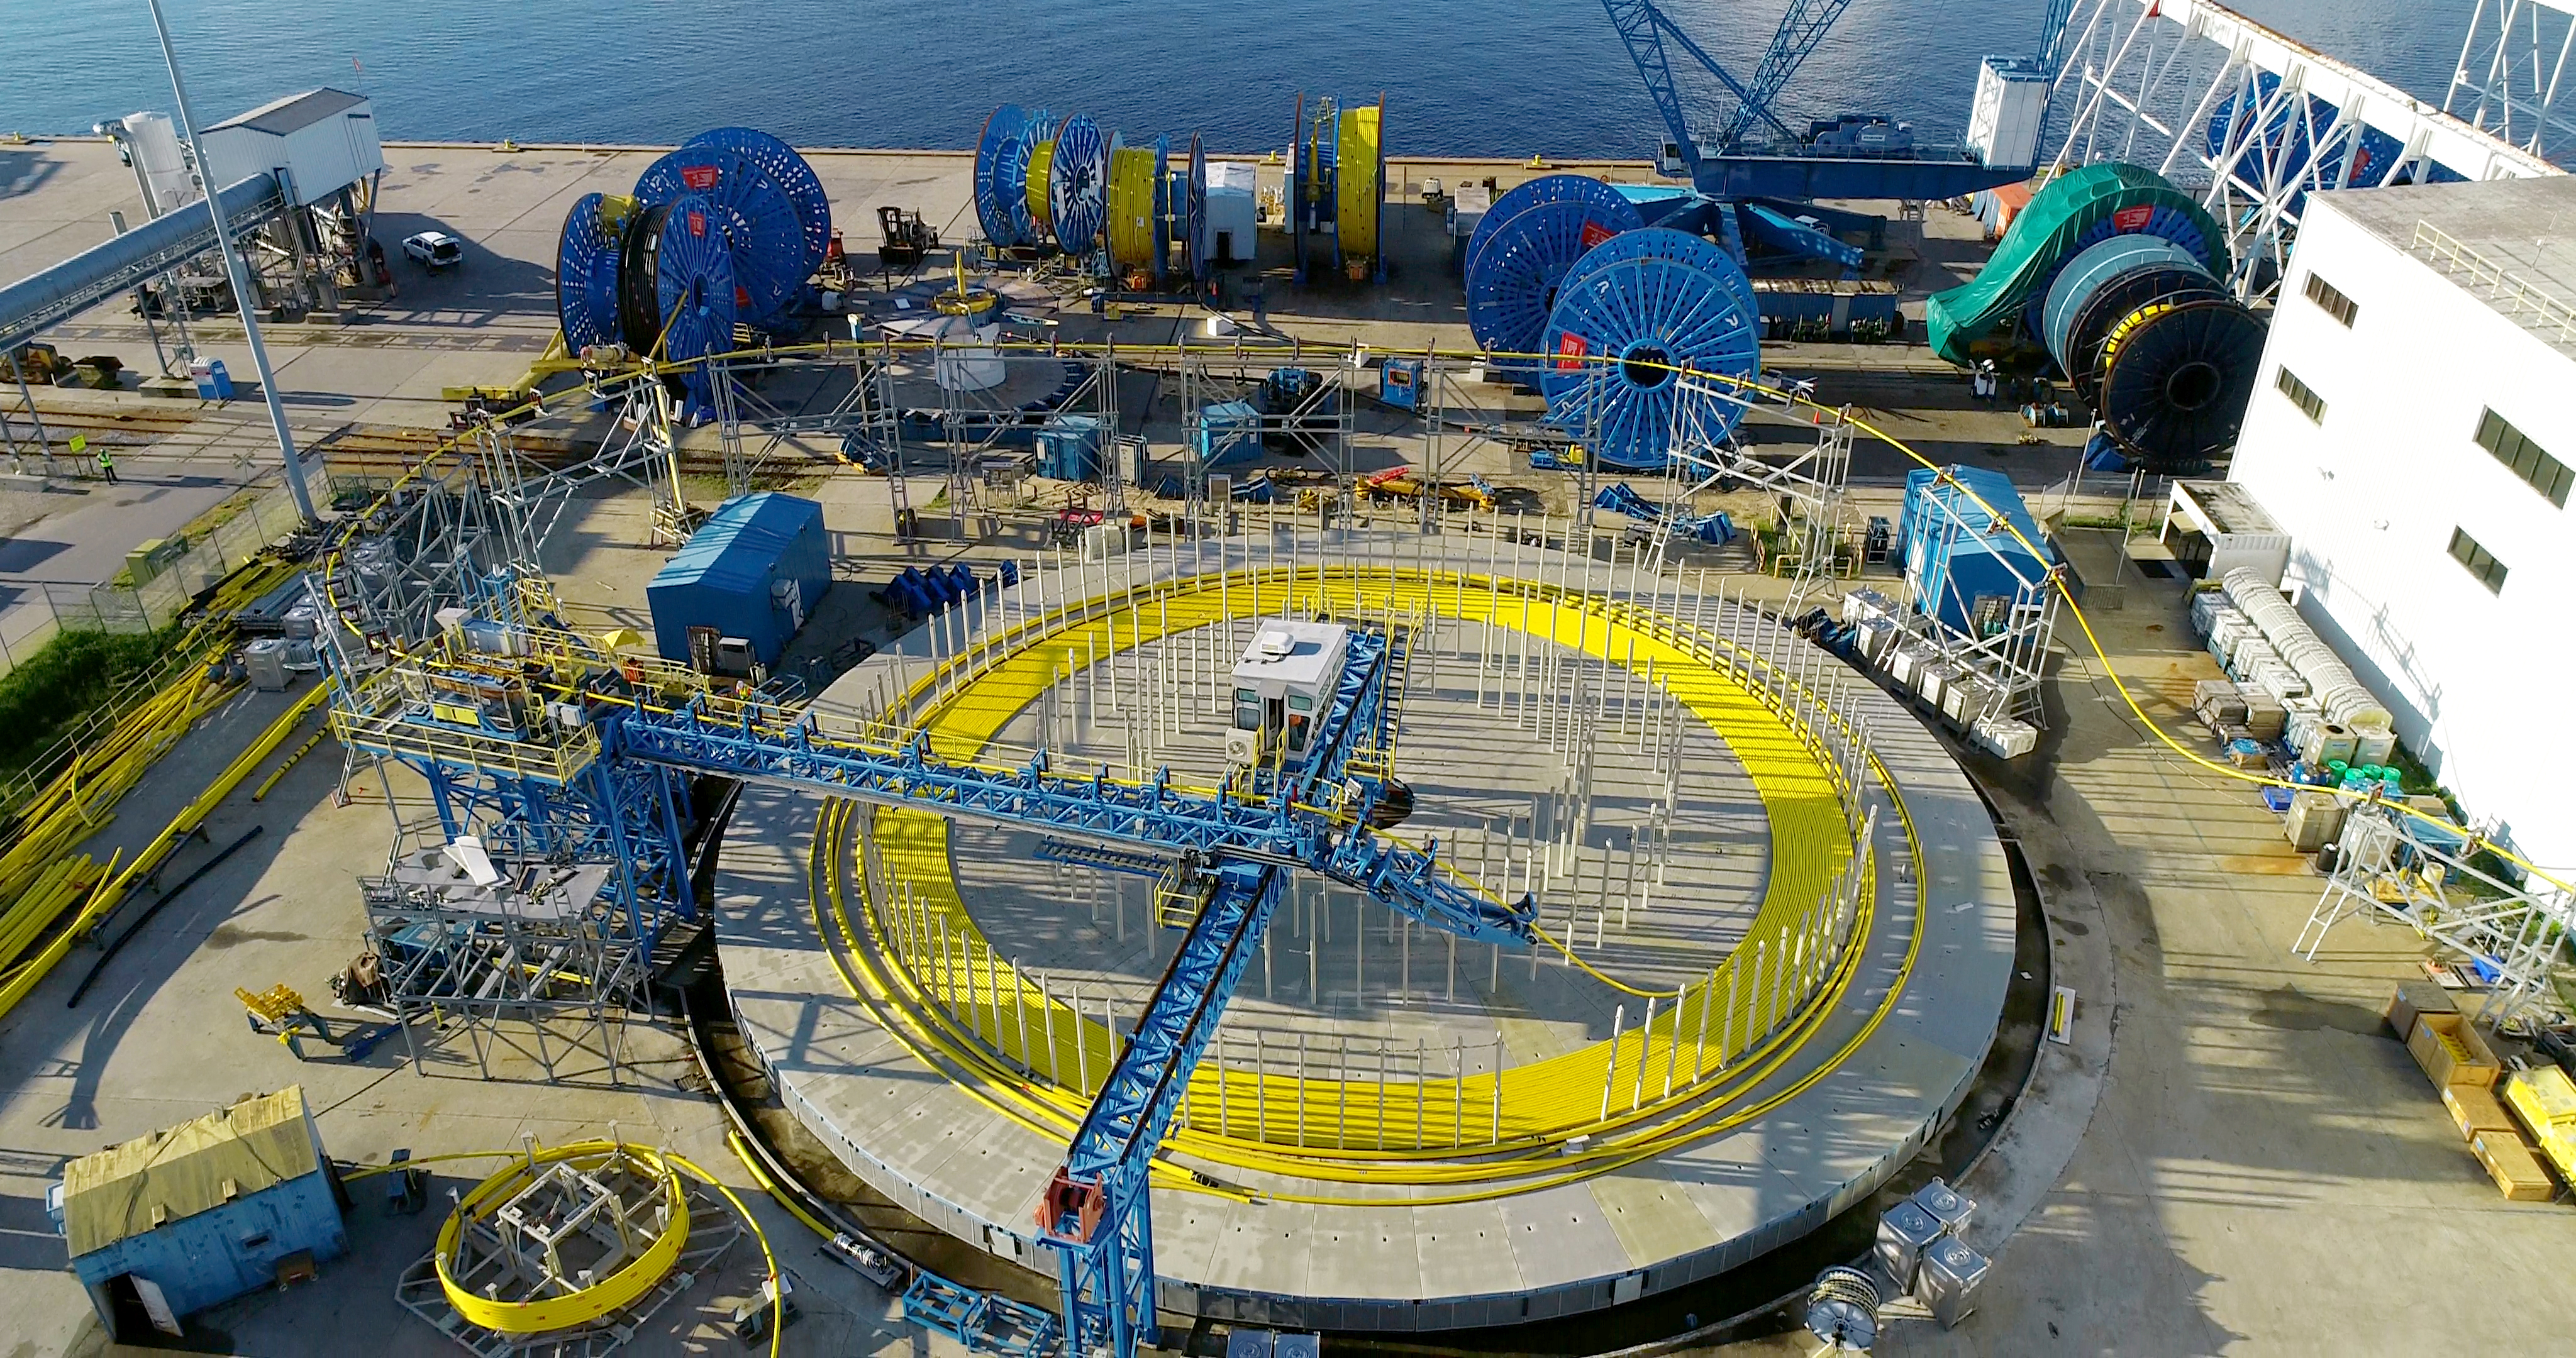 Oceaneering’s umbilicals manufacturing facility is located in Panama City, Fla. (Source: Oceaneering)